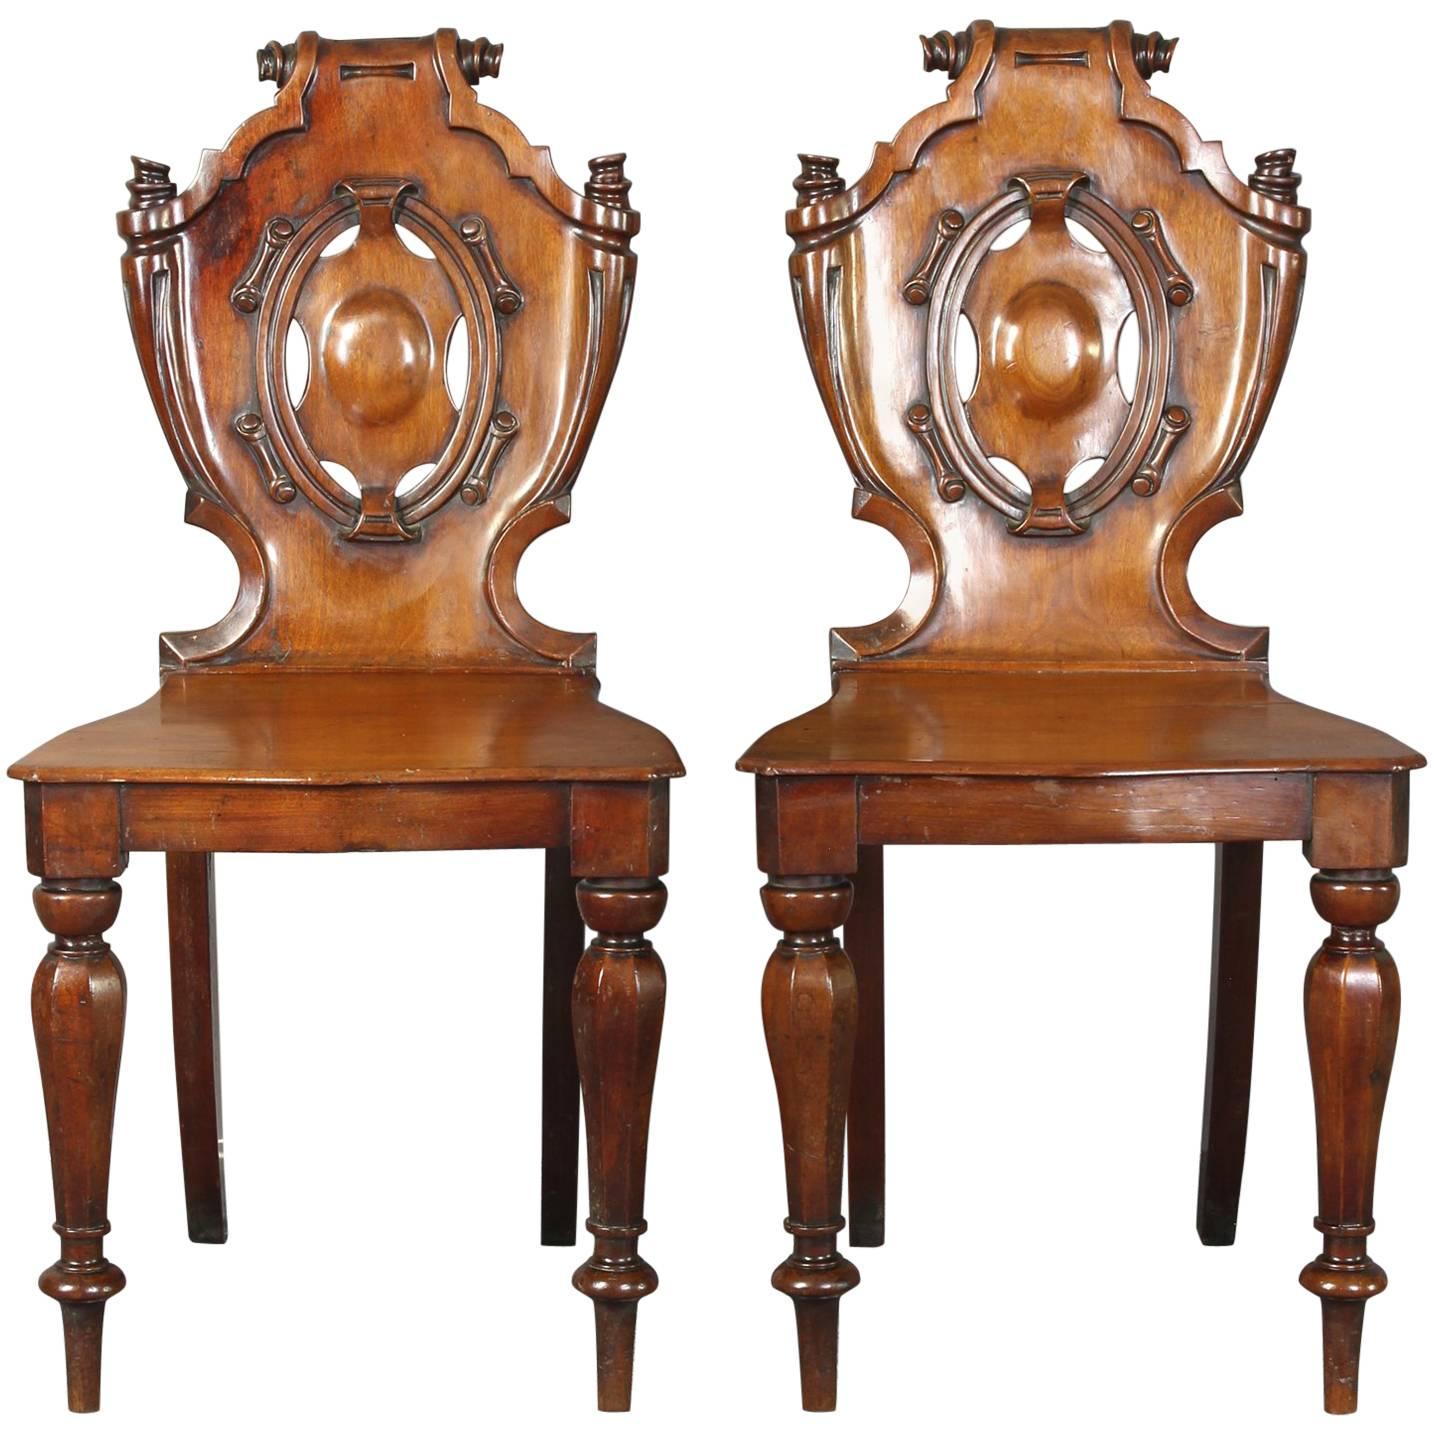 Pair of English William IV Carved Mahogany Hall Chairs